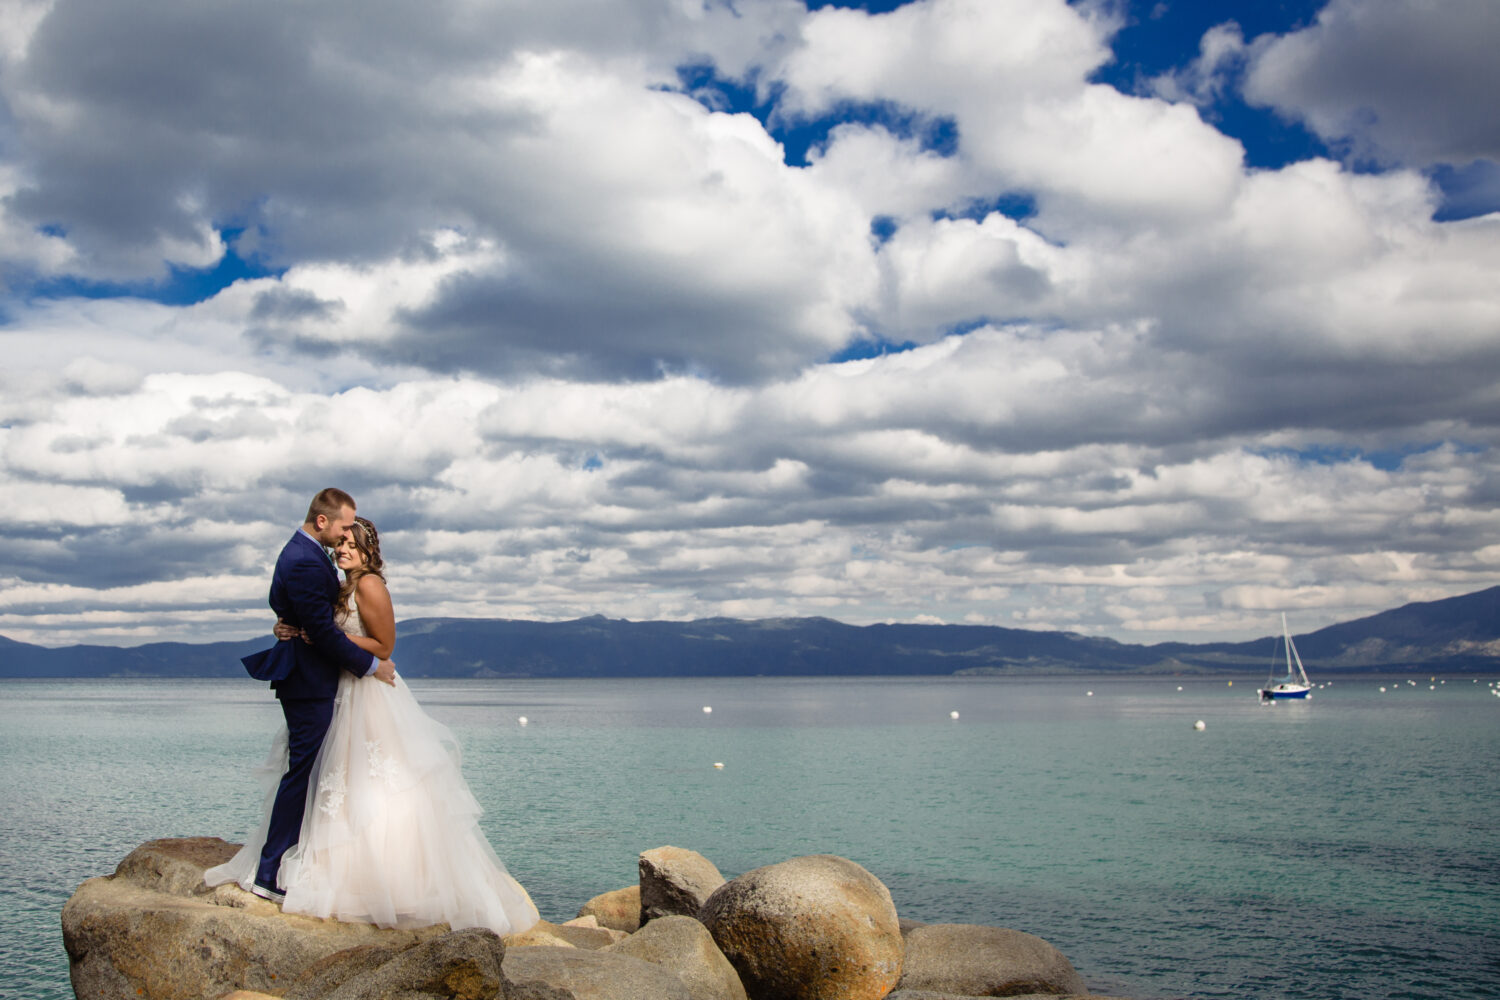 A wedding day couples portrait next to Lake Tahoe with puffy clouds and a sailboat in the background.